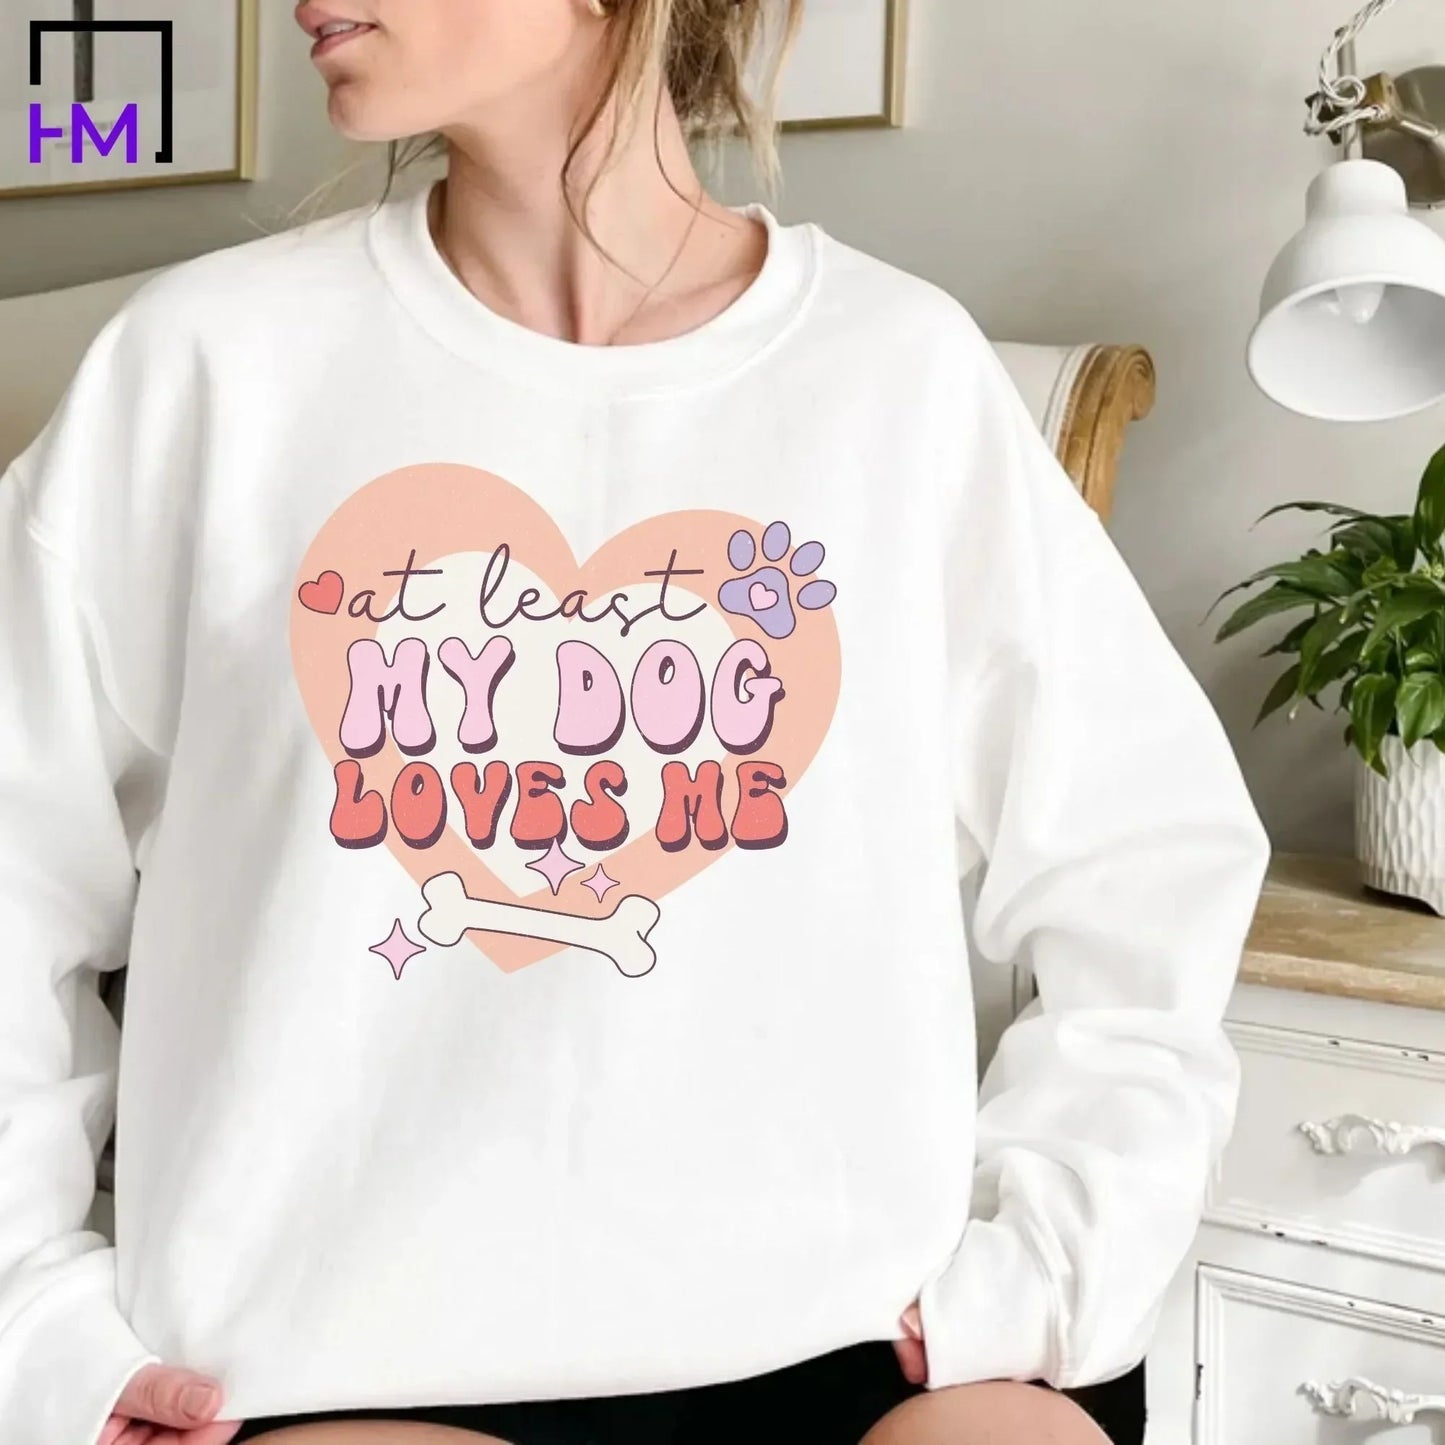 At Least My Dog Loves Me, Funny Valentine's Day Shirt, Bestie Valentine's Gift for Her, Love Shirts for Women, Cute V-Day Shirt, Proud to Be Single, Self Love Shirt HMDesignStudioUS